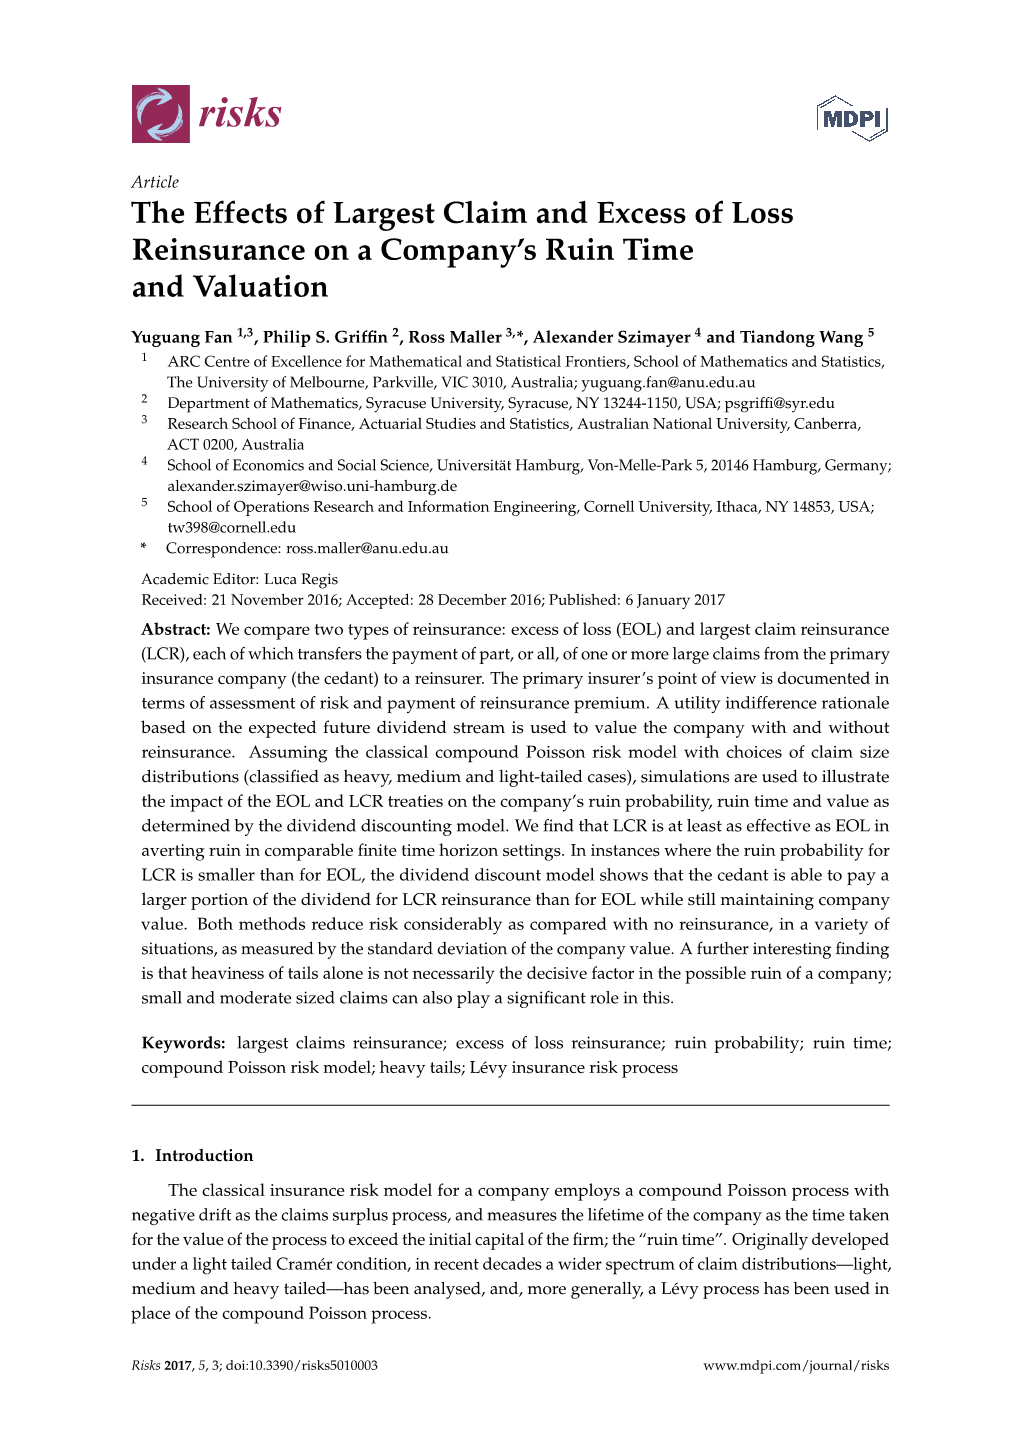 The Effects of Largest Claim and Excess of Loss Reinsurance on a Company’S Ruin Time and Valuation